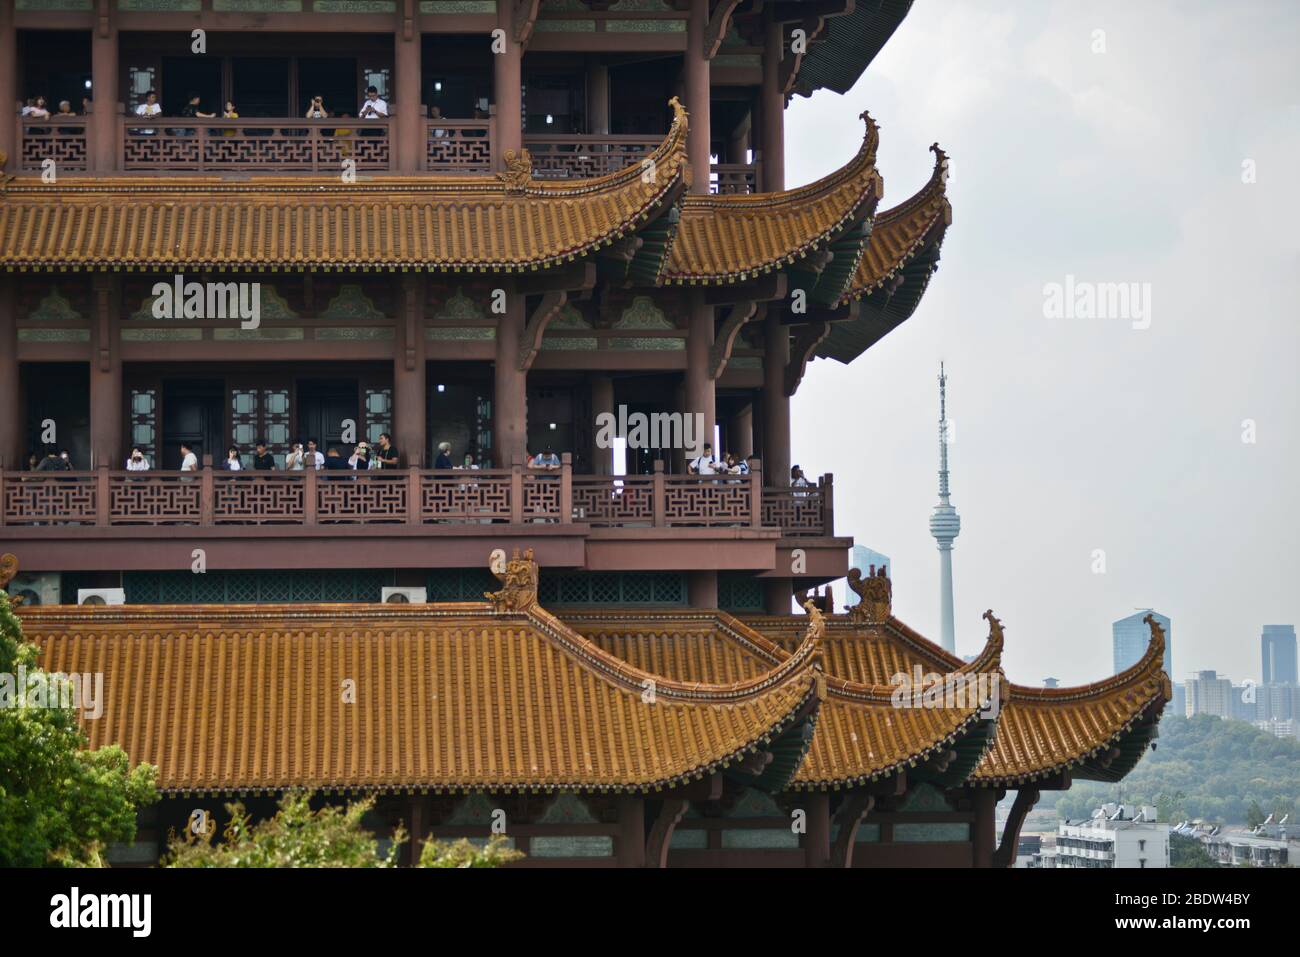 Yellow Crane Tower: details on the architecture with the TV Tower on the background. Wuhan, China Stock Photo